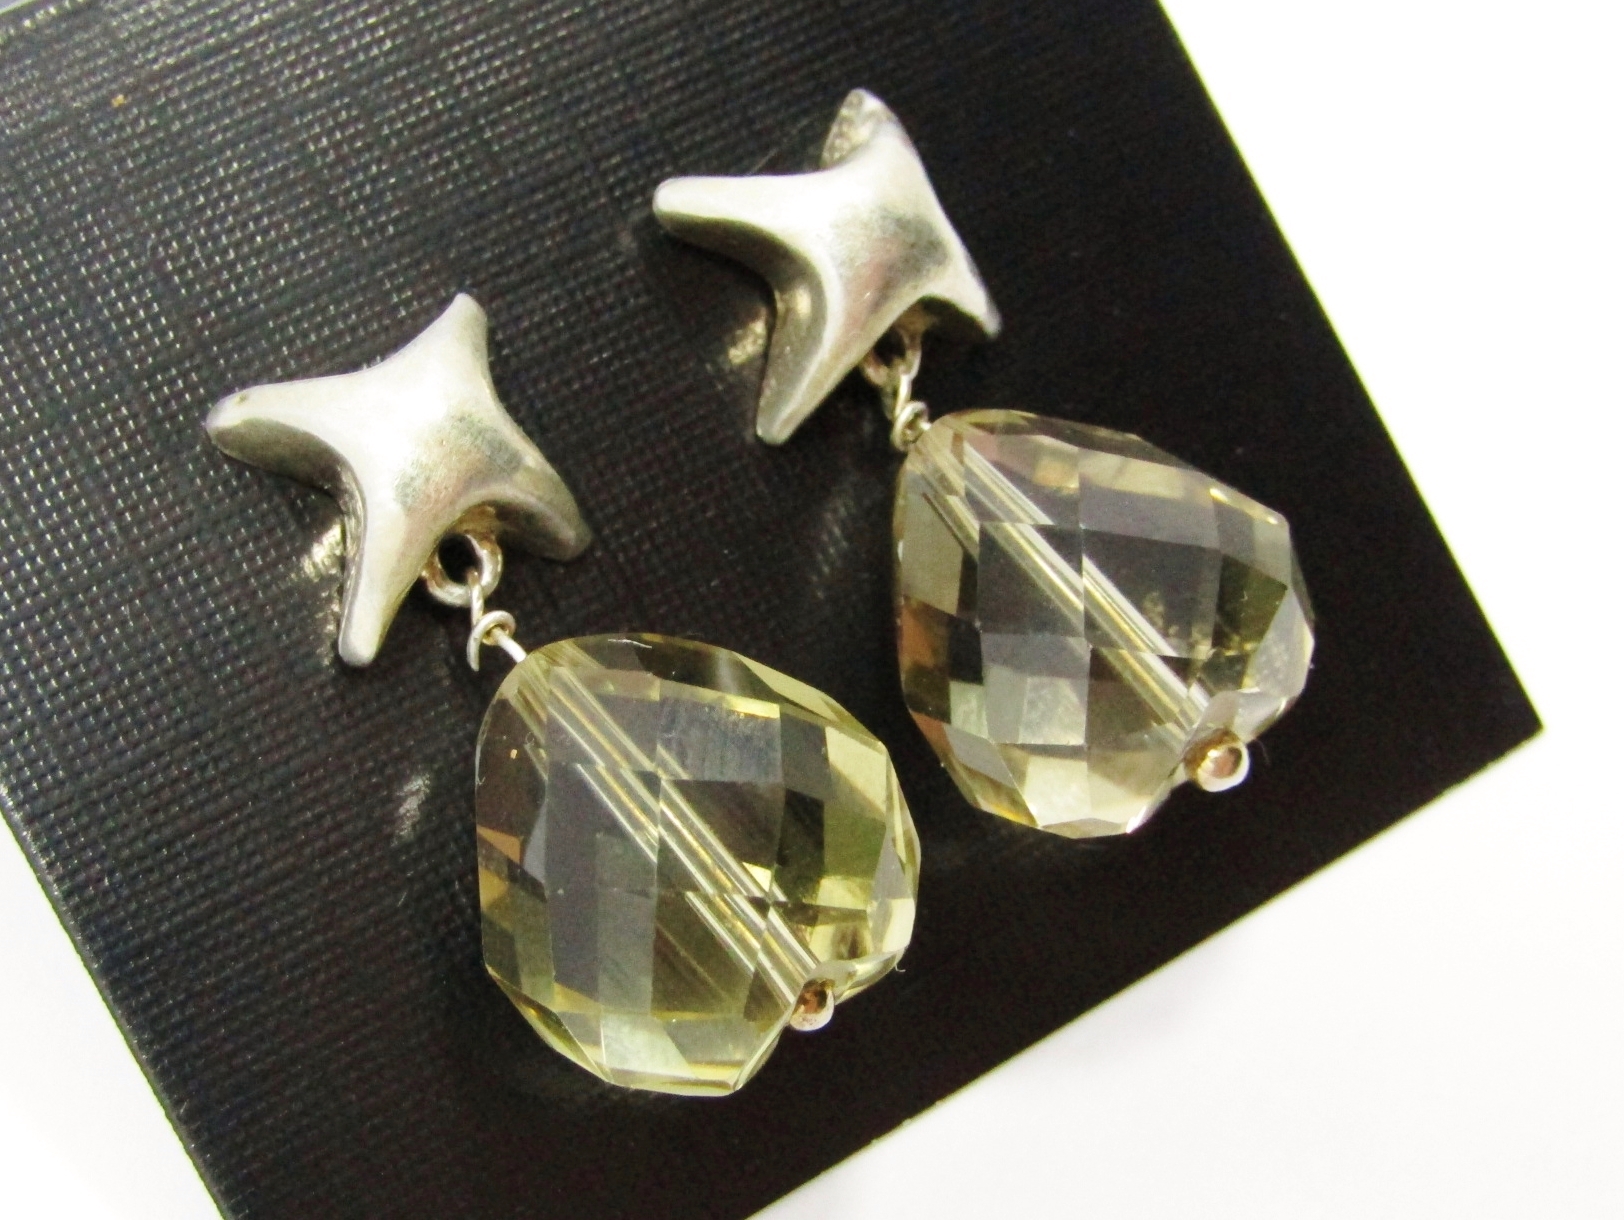 A Gorgeous Pair of Gold Gilt Over Sterling Silver Briolette Cut Light Citrine Dangling Earrings